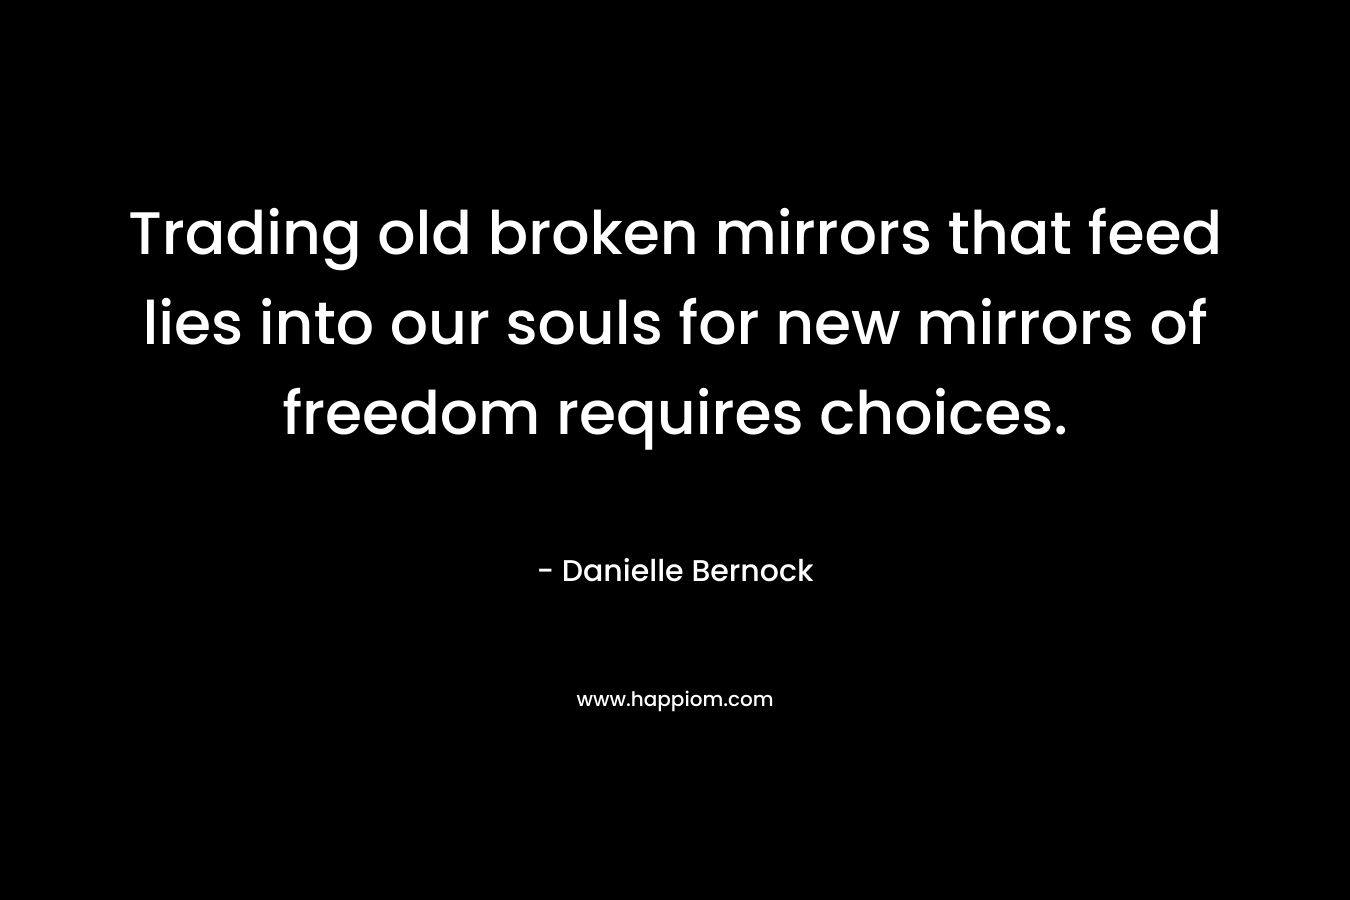 Trading old broken mirrors that feed lies into our souls for new mirrors of freedom requires choices.